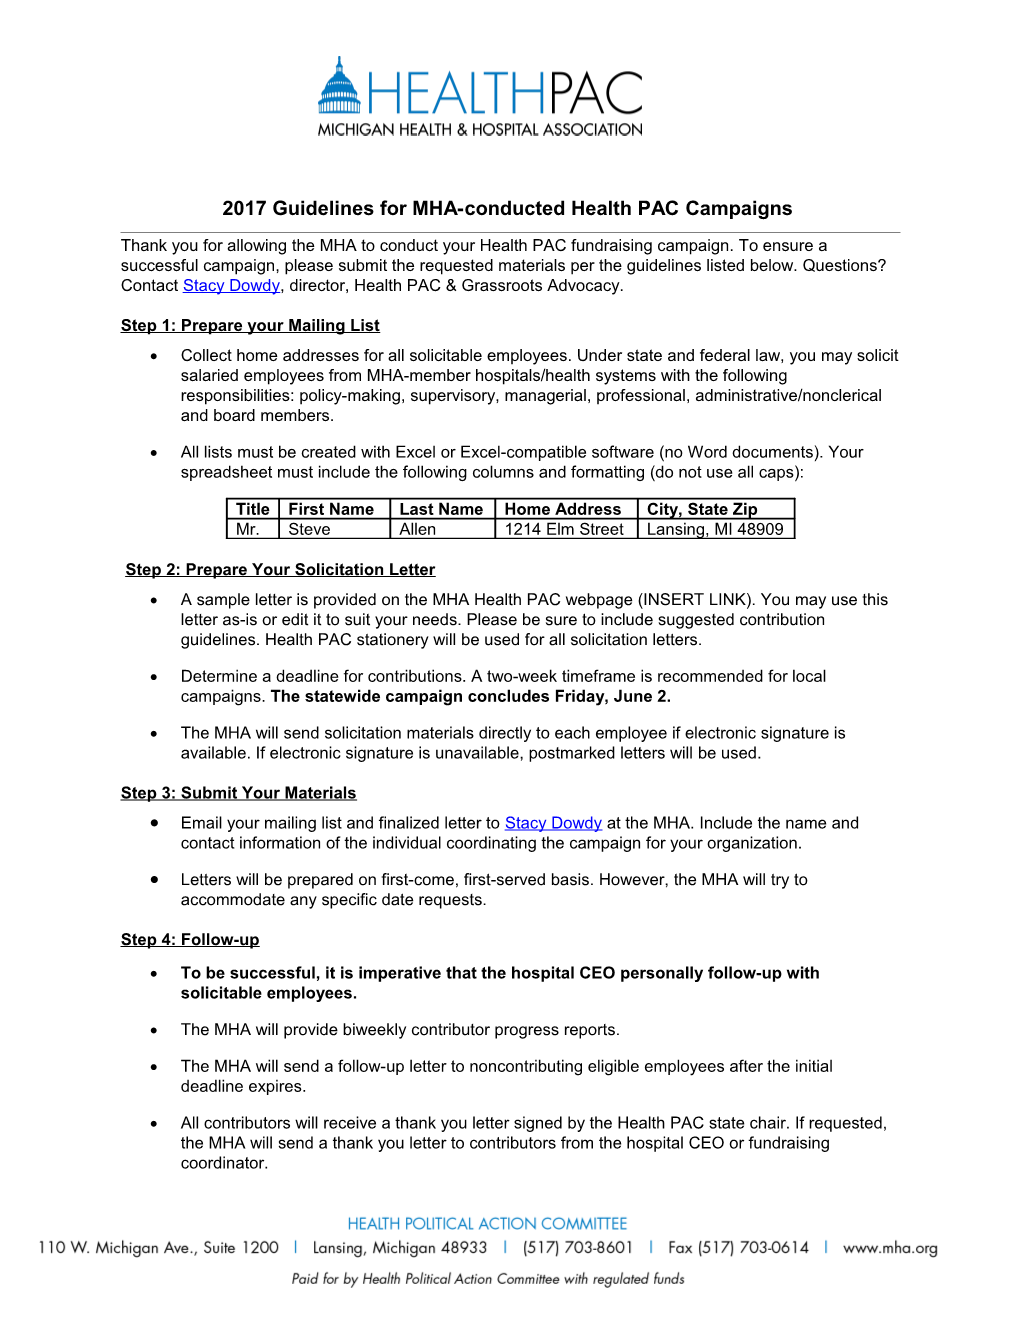 2006 HEALTH PAC Mailing Service Guidelines